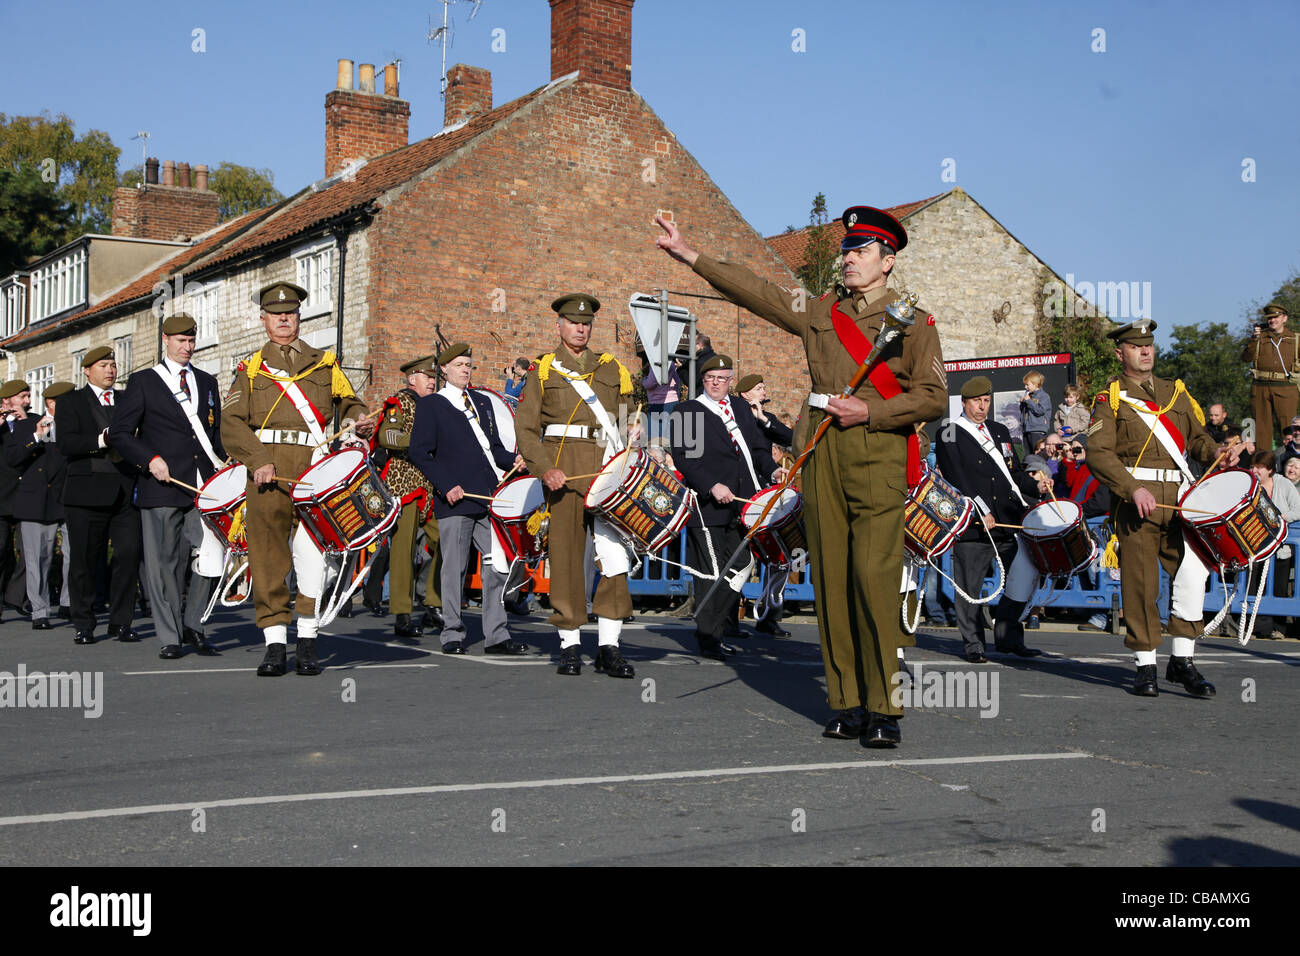 MILITARY MARCHING BAND PICKERING NORTH YORKSHIRE 15 October 2011 Stock Photo